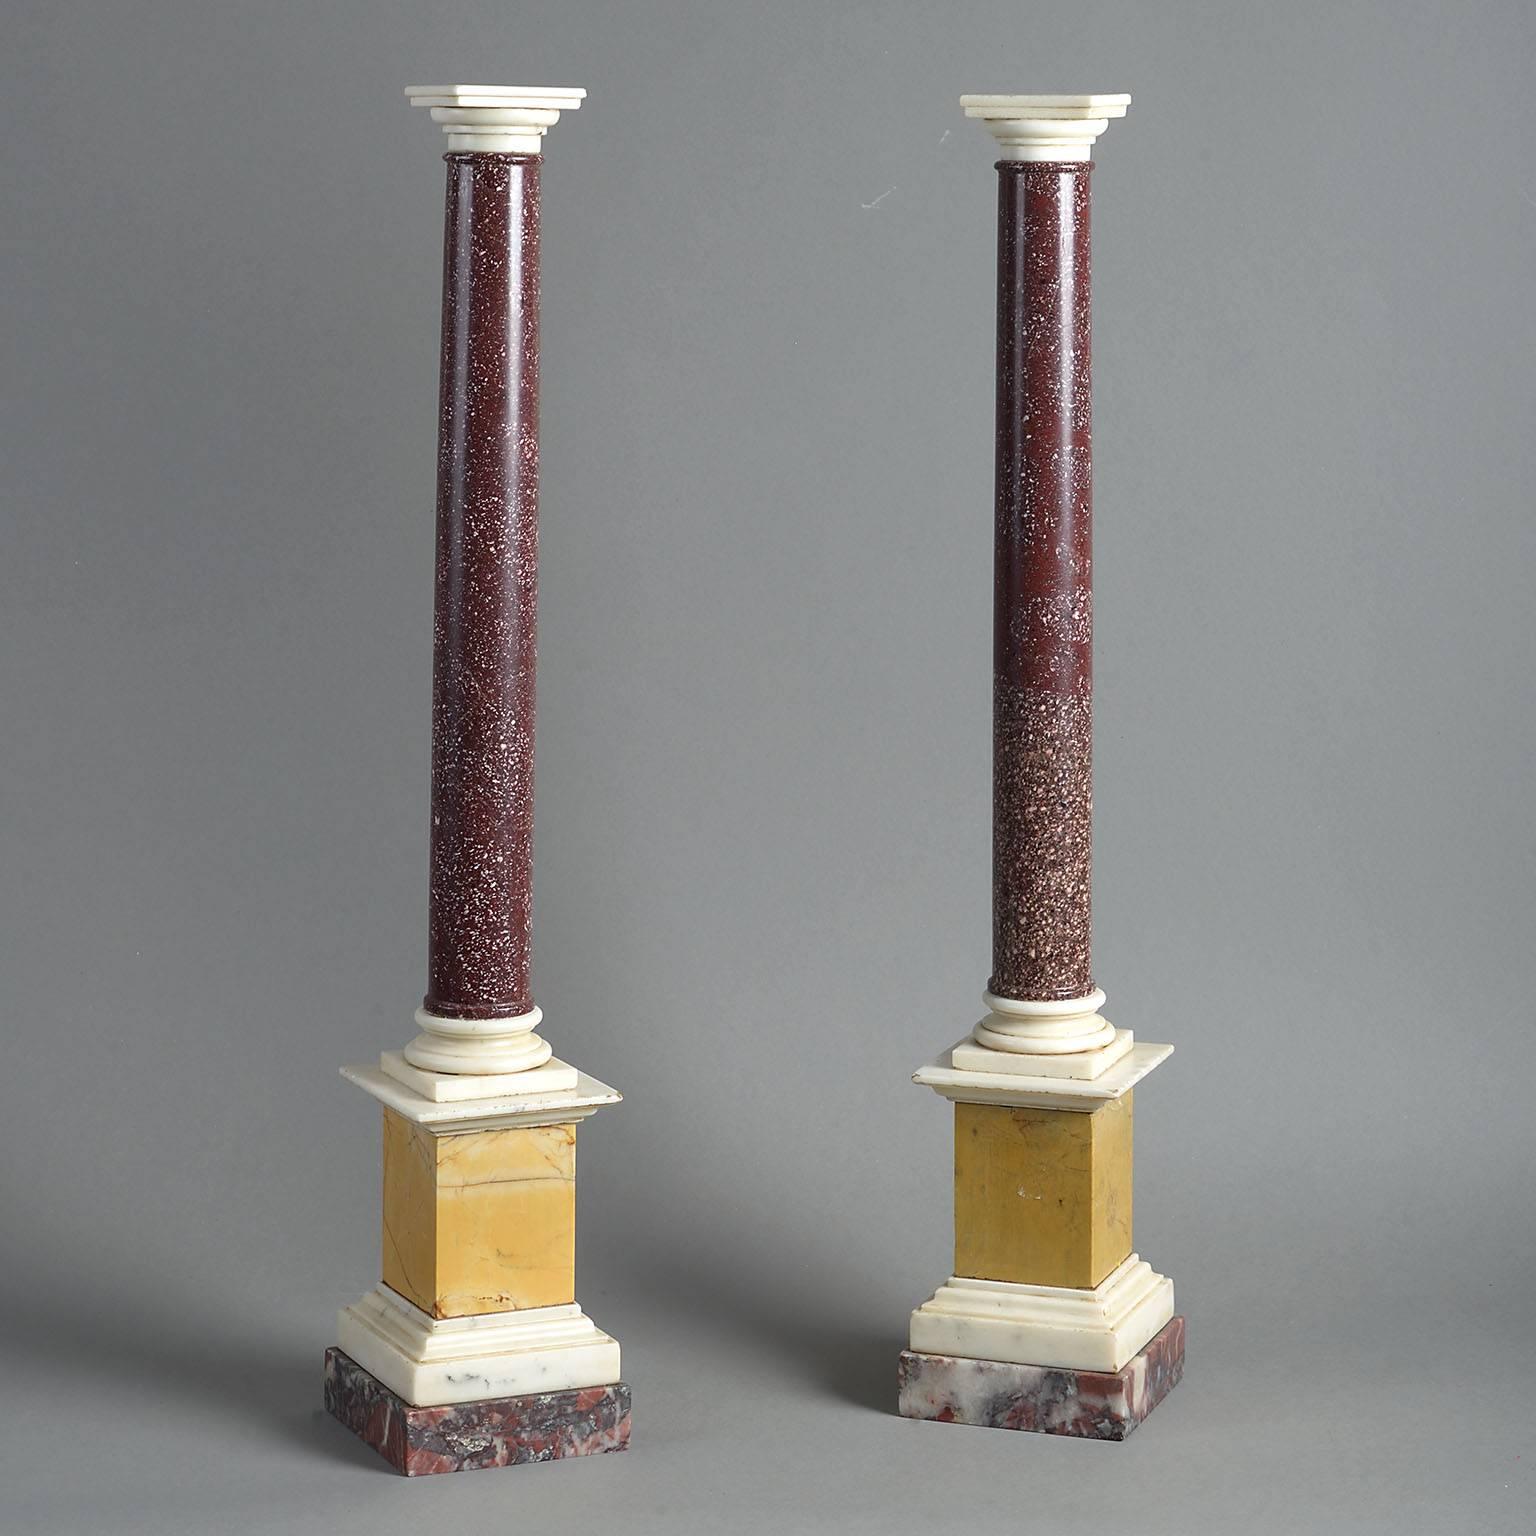 Of Tuscan form, the Porphyry column shafts surmounted by white statuary marble capitals, standing on white statuary marble bases and raised on Siena marble plinths with statuary marble mouldings. 

Measures: Width 11 cm / 4.25''
Height 59 cm /